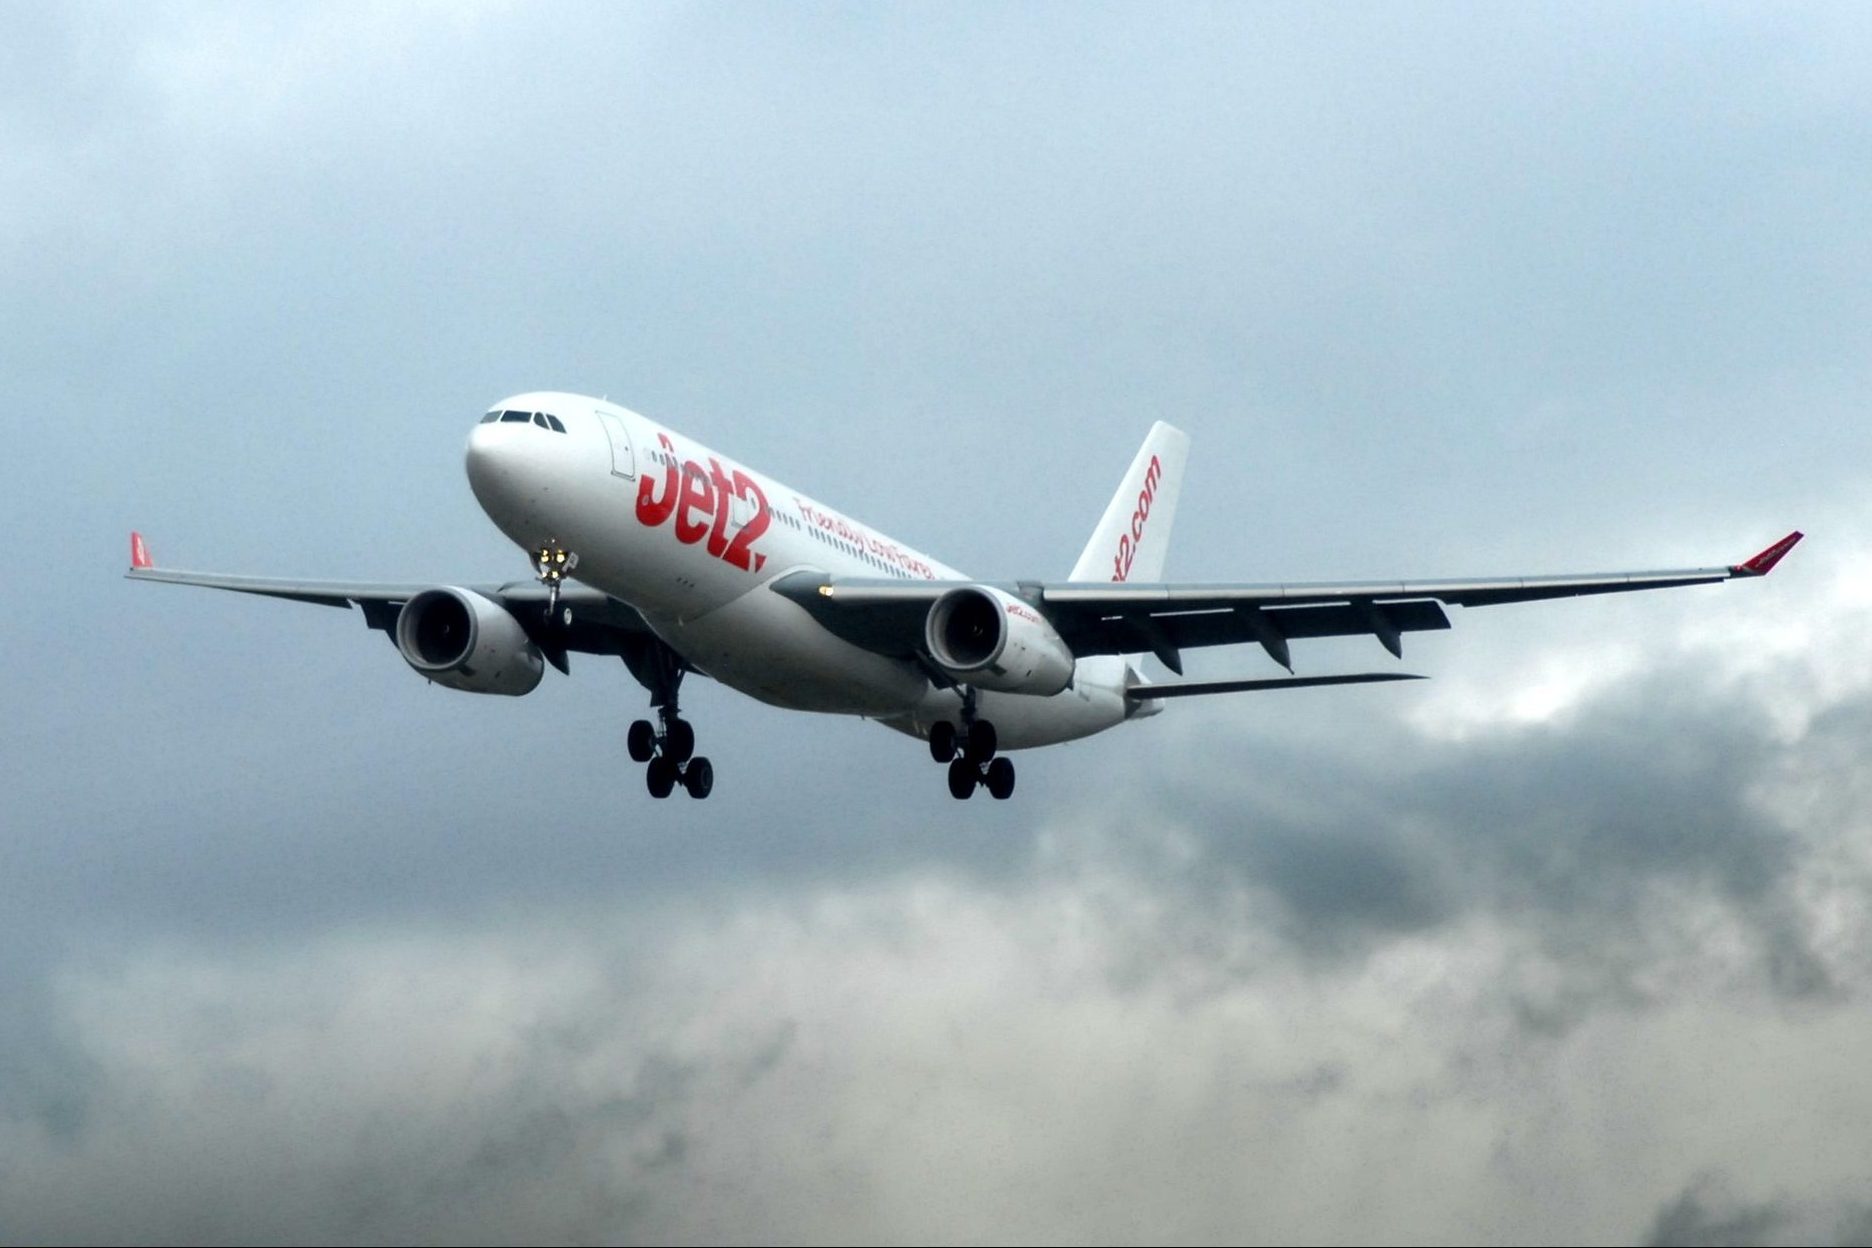 An Airbus A330 aircraft operated by Jet2.